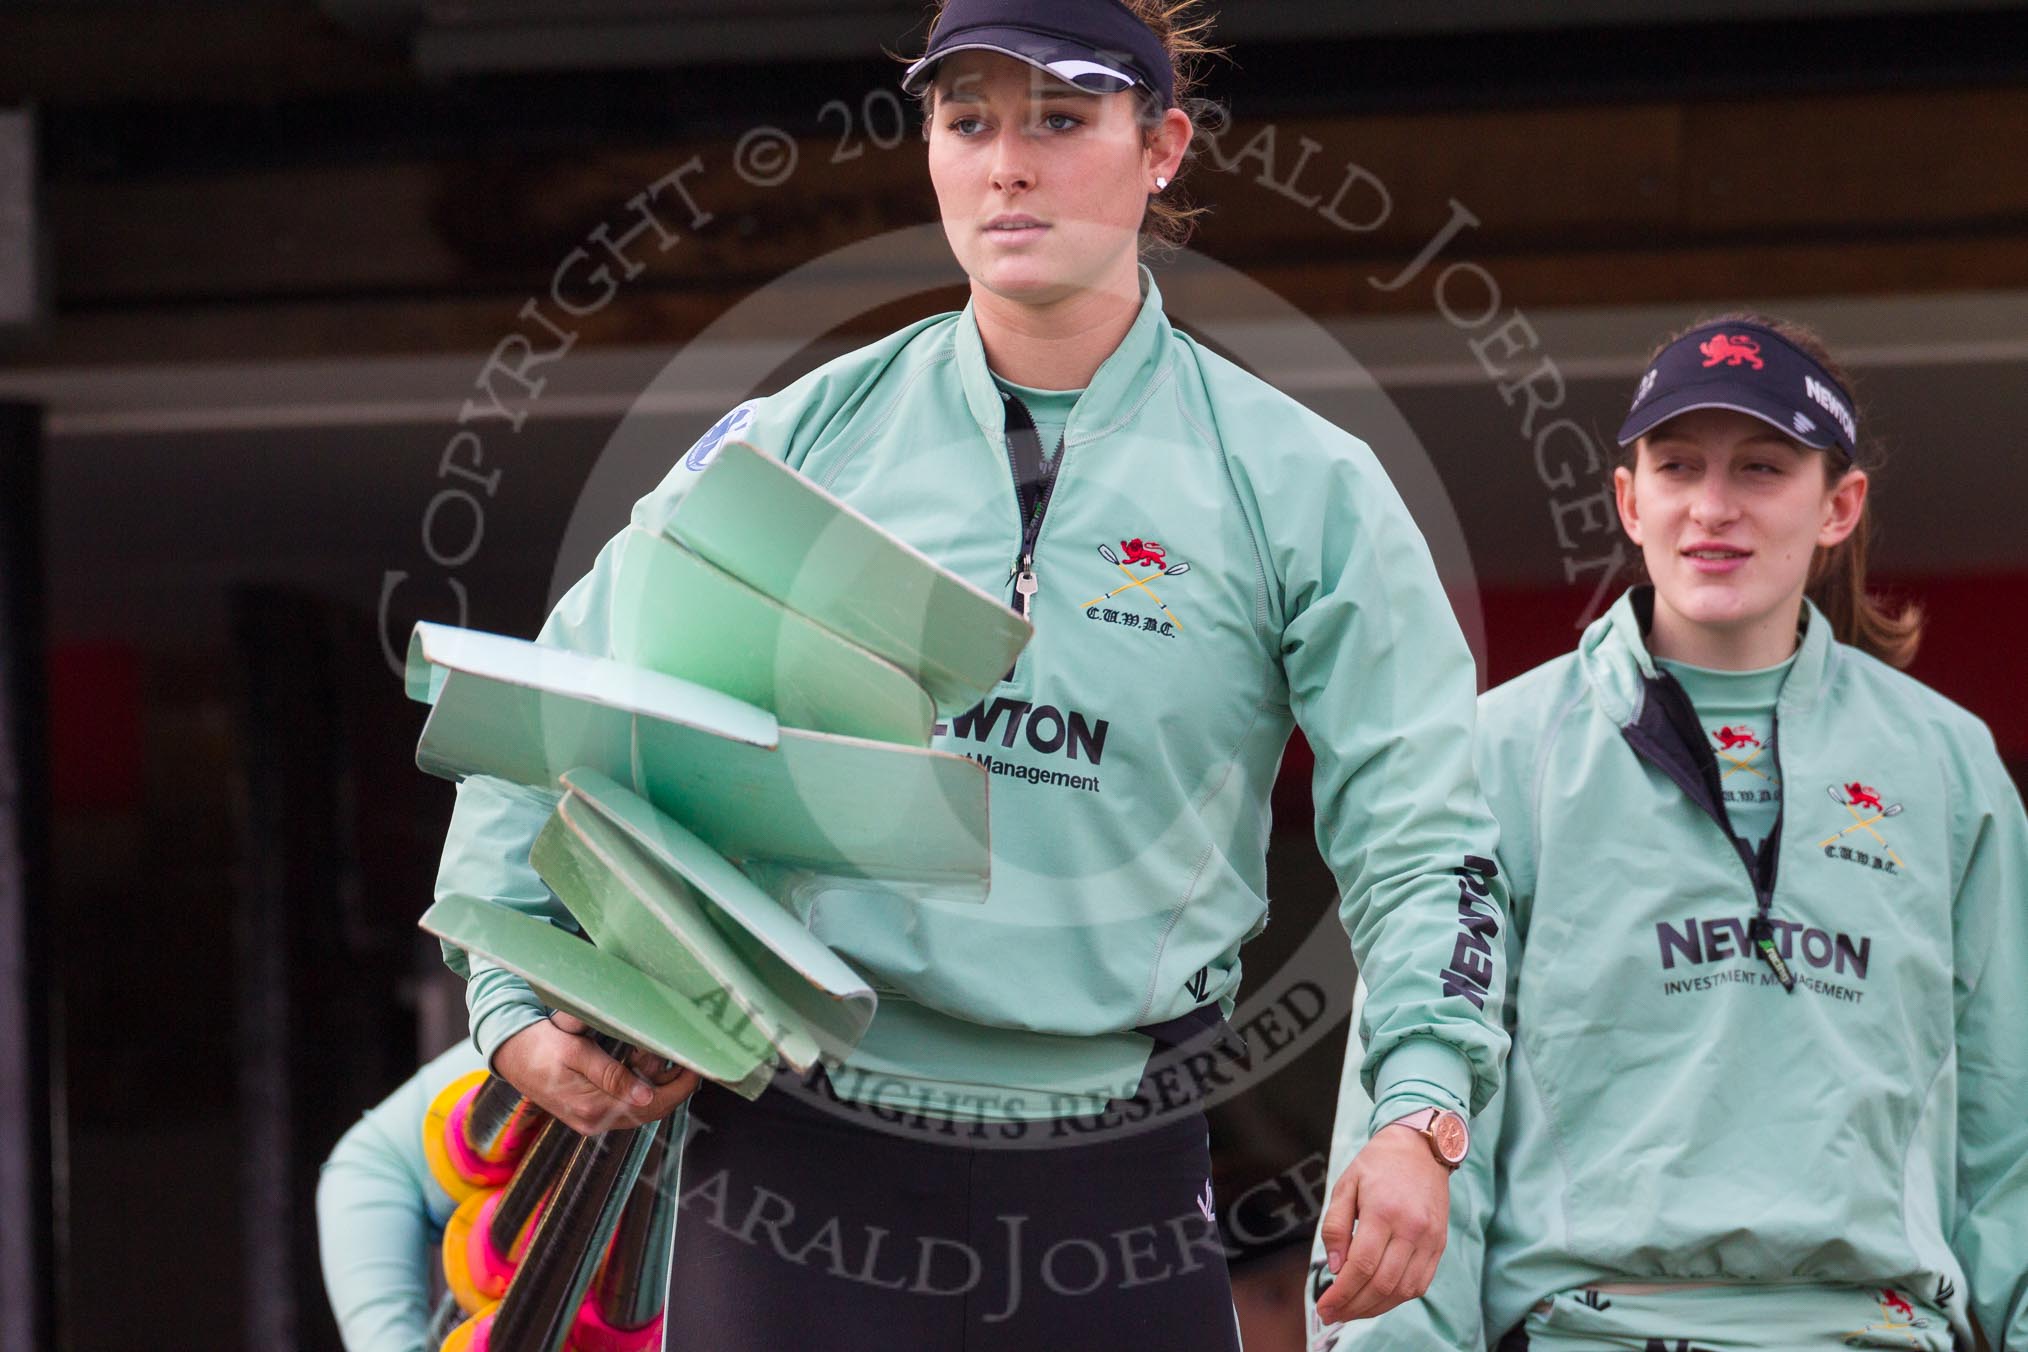 The Boat Race season 2016 - Women's Boat Race Trial Eights (CUWBC, Cambridge).
River Thames between Putney Bridge and Mortlake,
London SW15,

United Kingdom,
on 10 December 2015 at 10:08, image #1